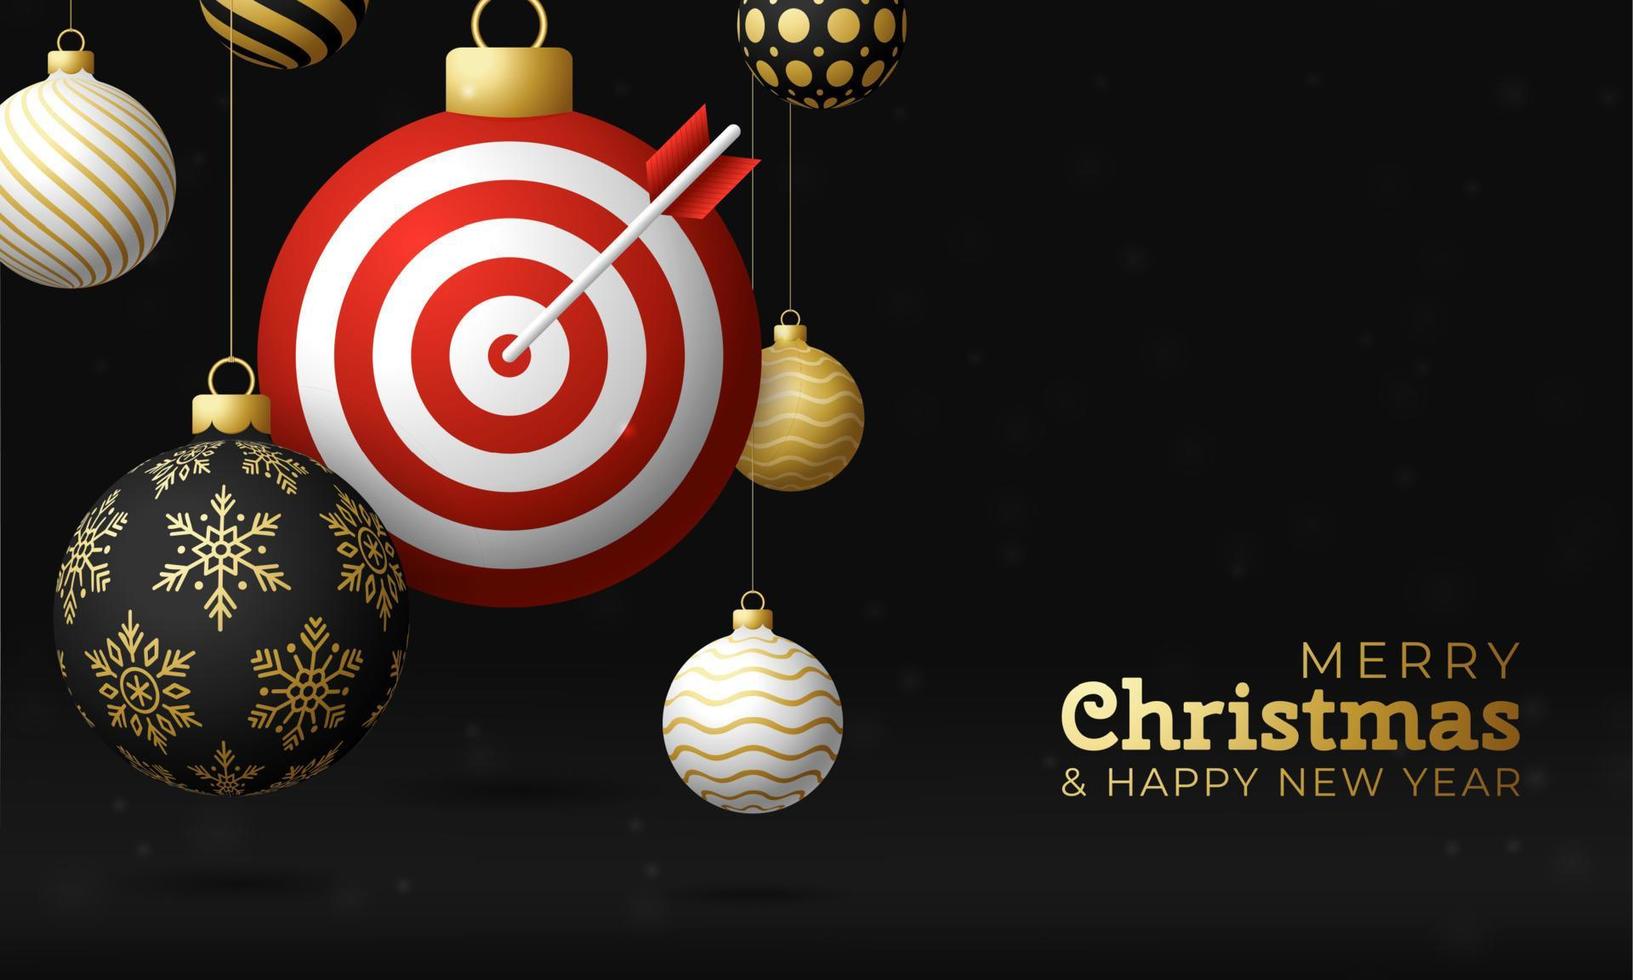 Target Dash Christmas card. Merry Christmas sport greeting card. Hang on a thread Target Dash as a xmas ball and golden bauble on black background. Sport Vector illustration.